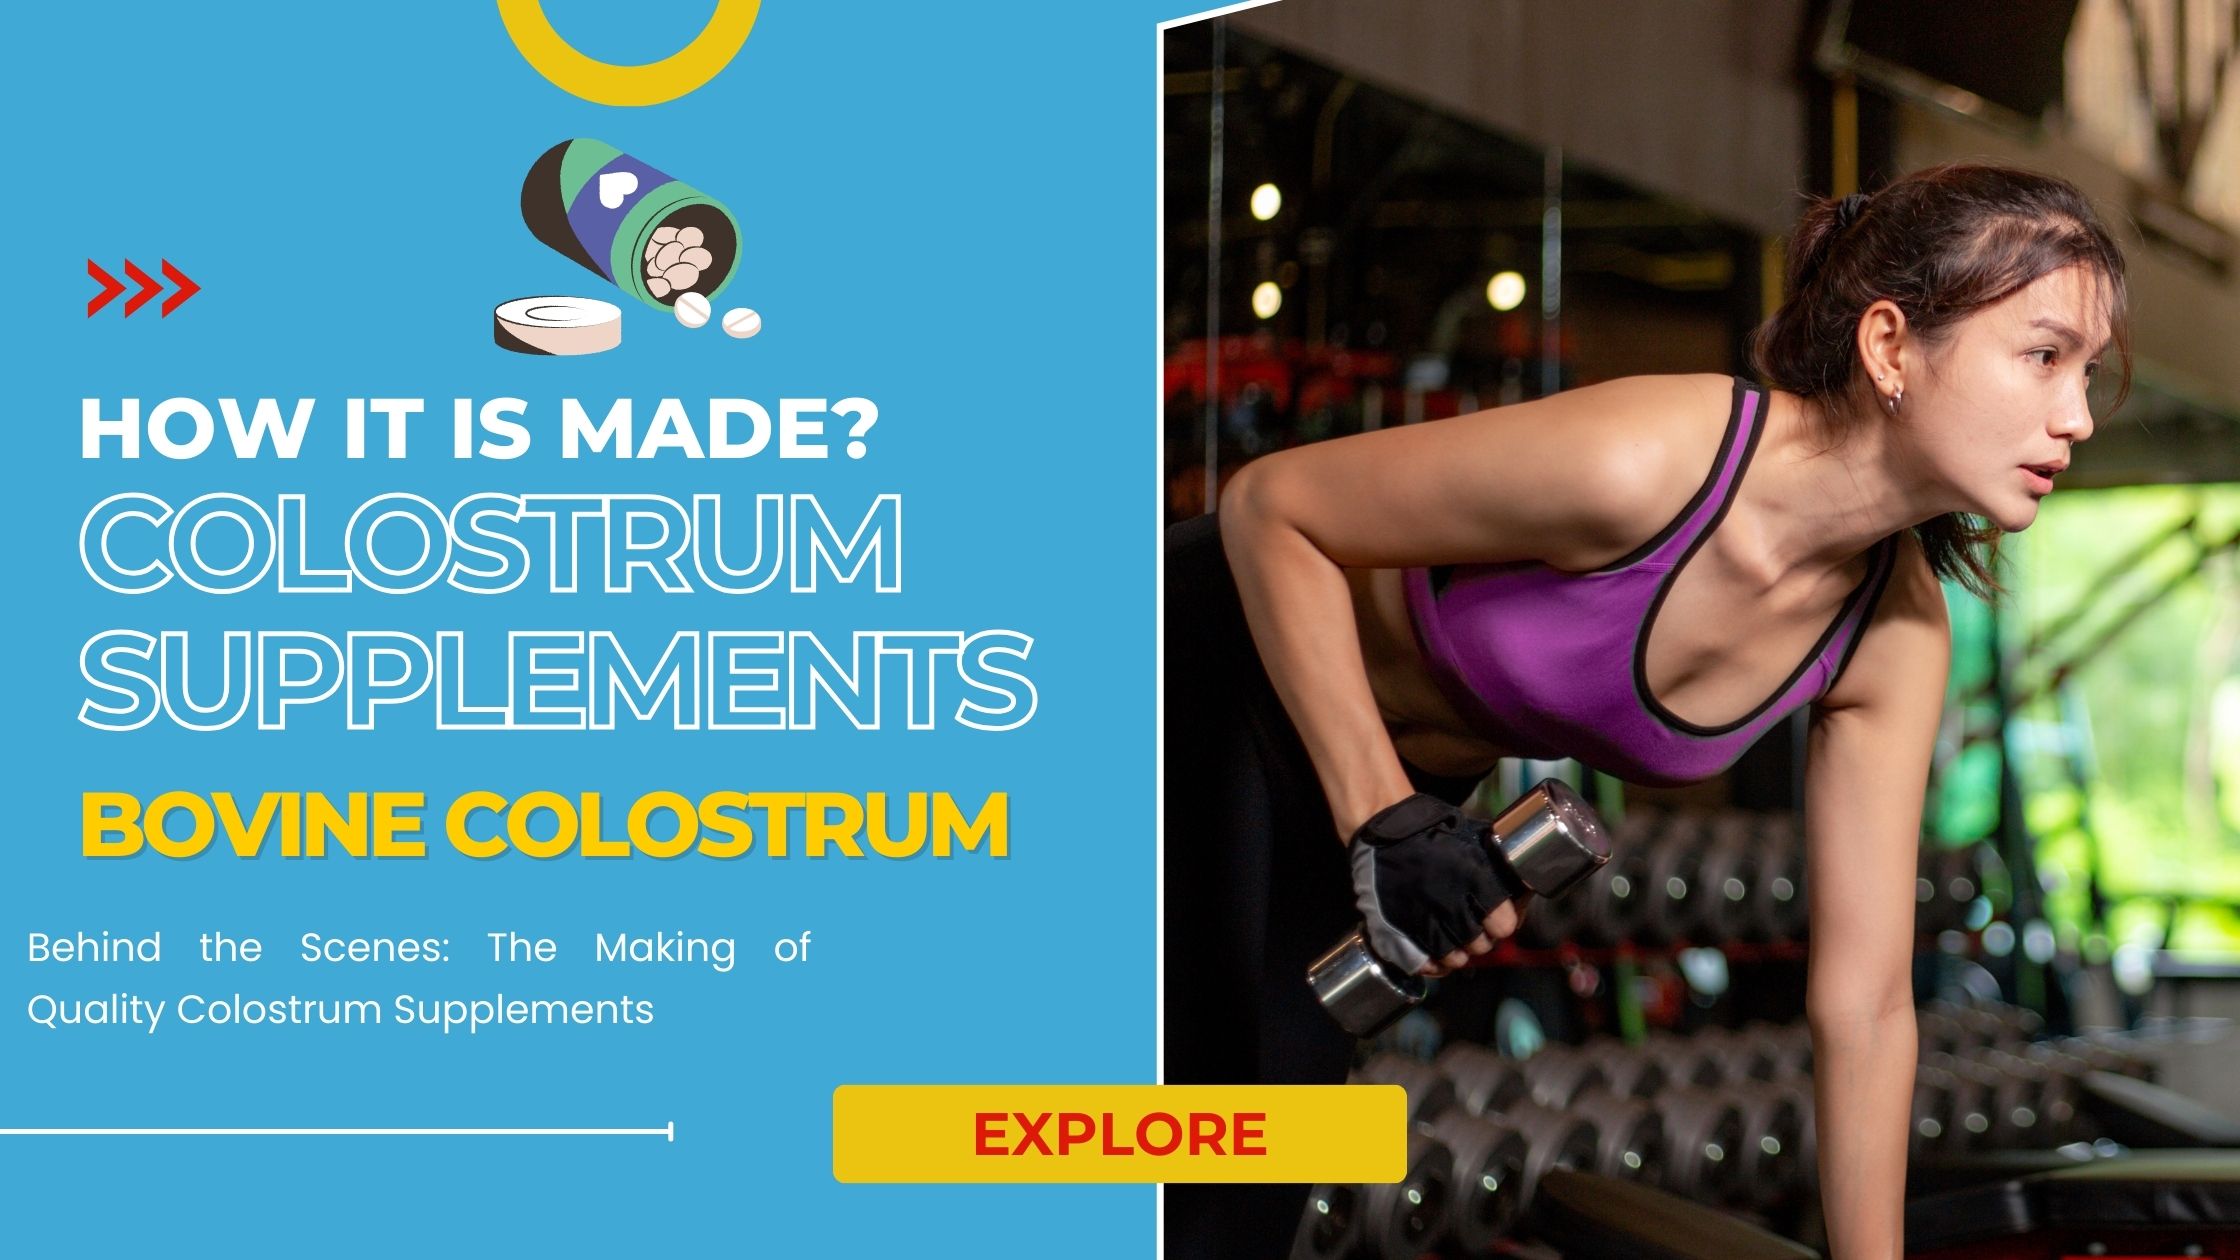 How Are Colostrum Supplements Made